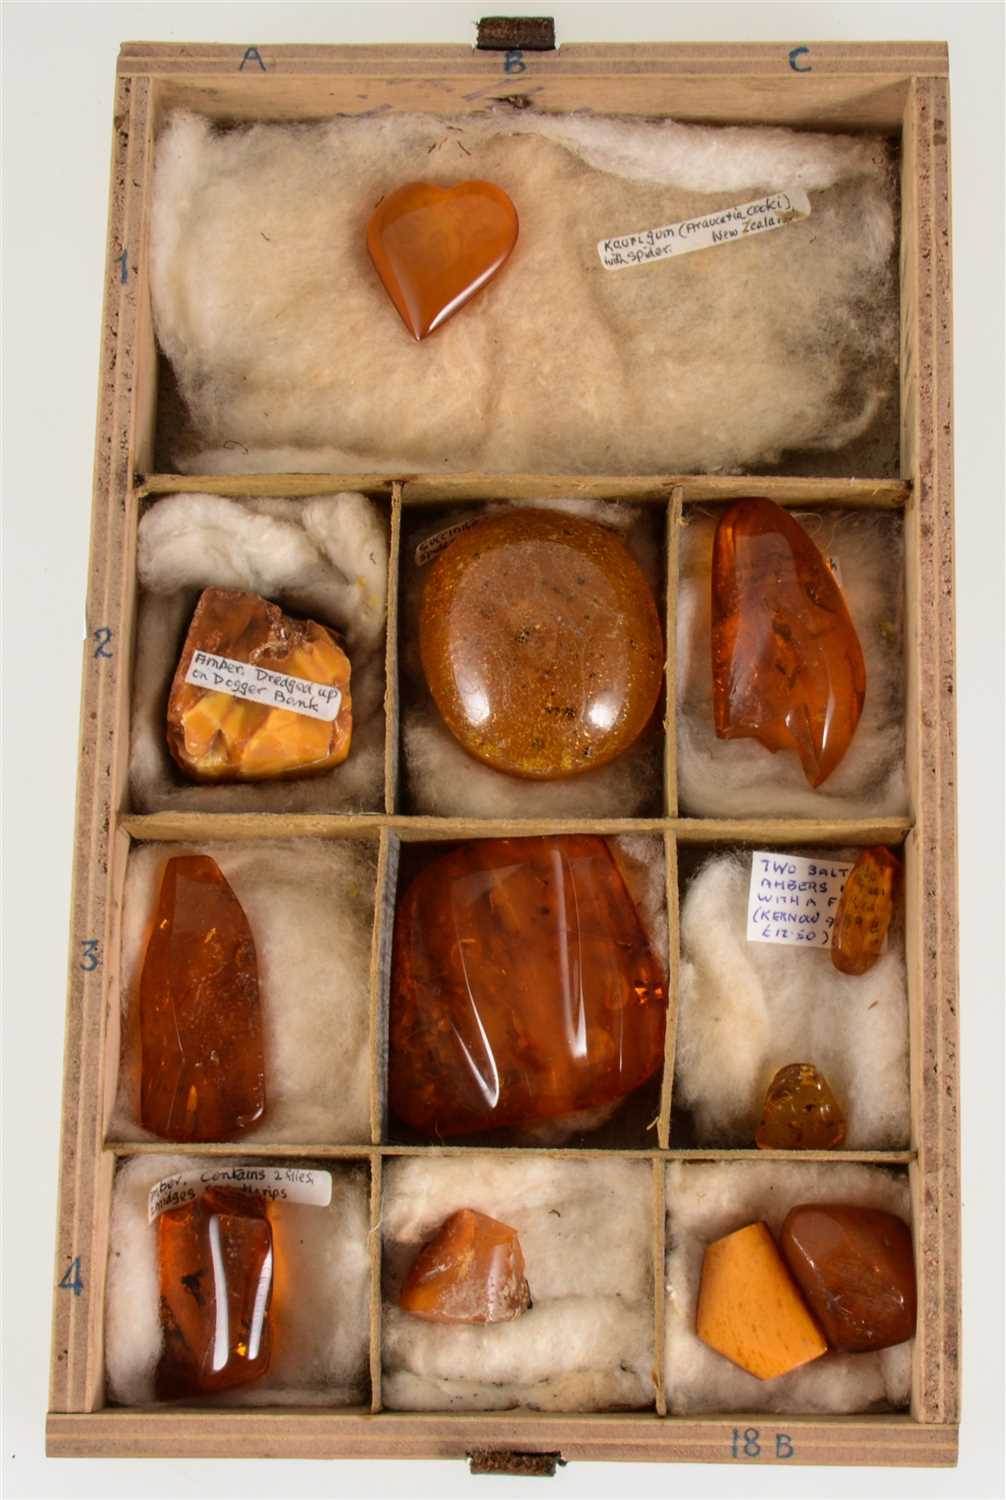 Lot 217 - Twelve pieces of amber/Kauri gum/succinite, five of which contain insects including a millipede, spider, flies and seeds.